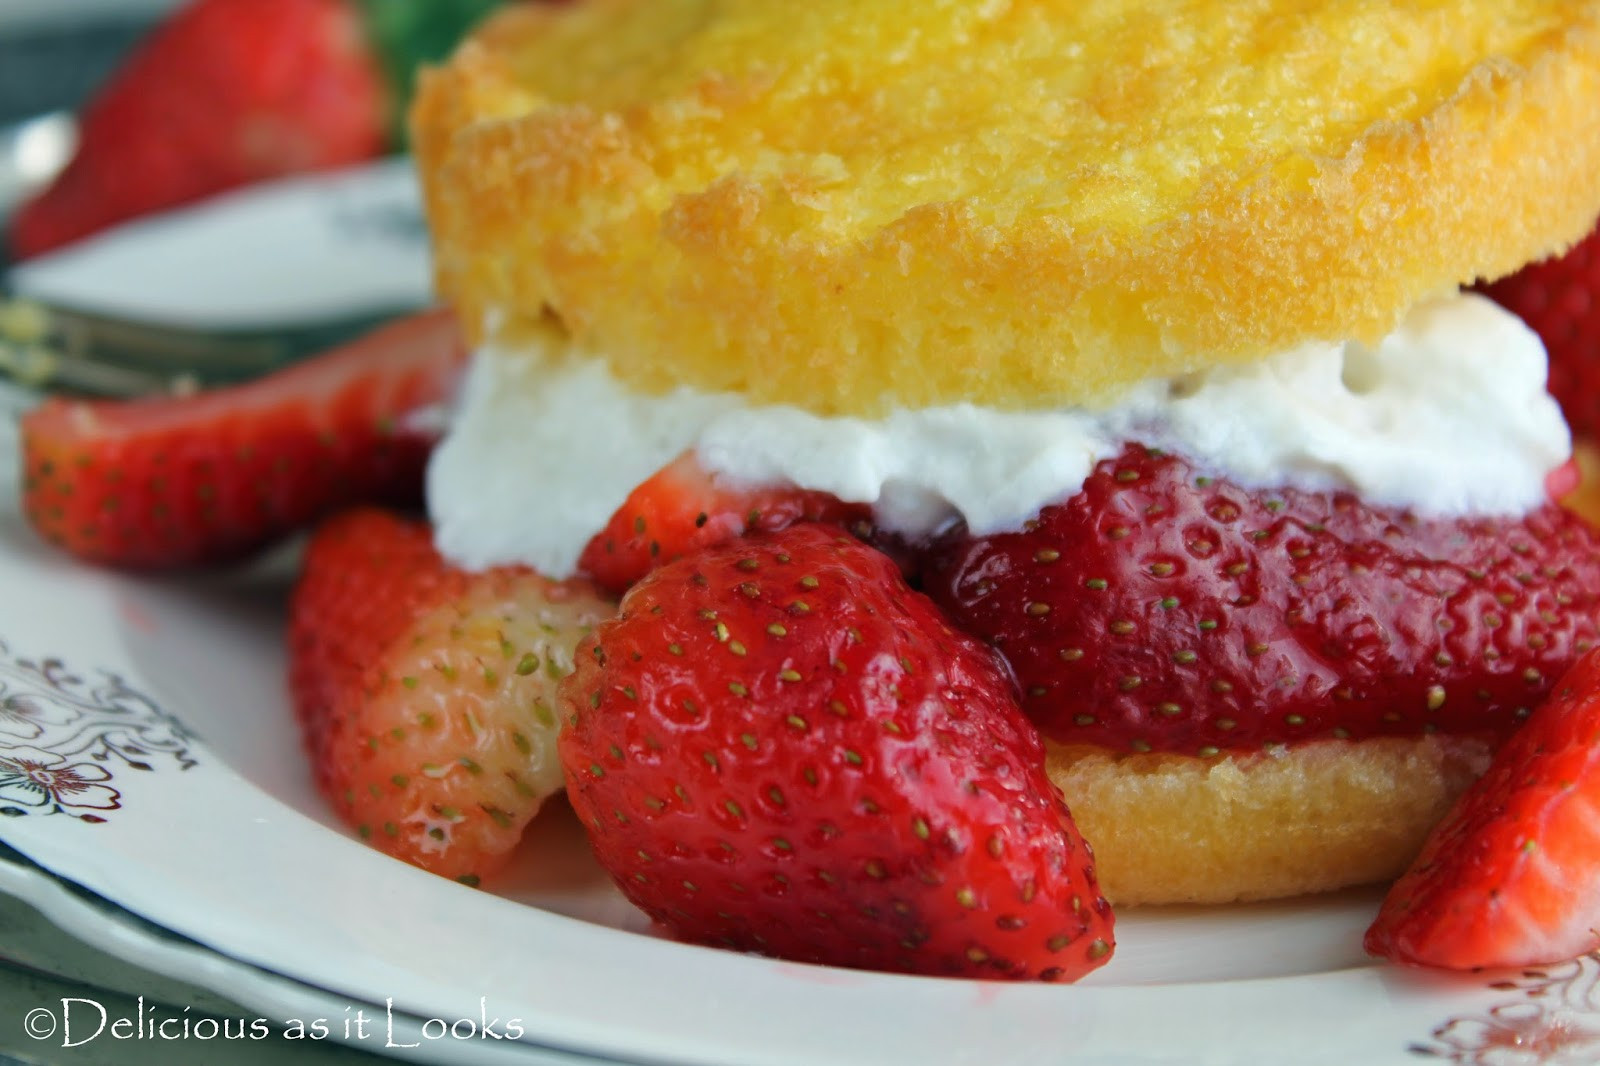 Dairy Free Strawberry Shortcake
 Delicious as it Looks Gluten Free Strawberry Shortcake